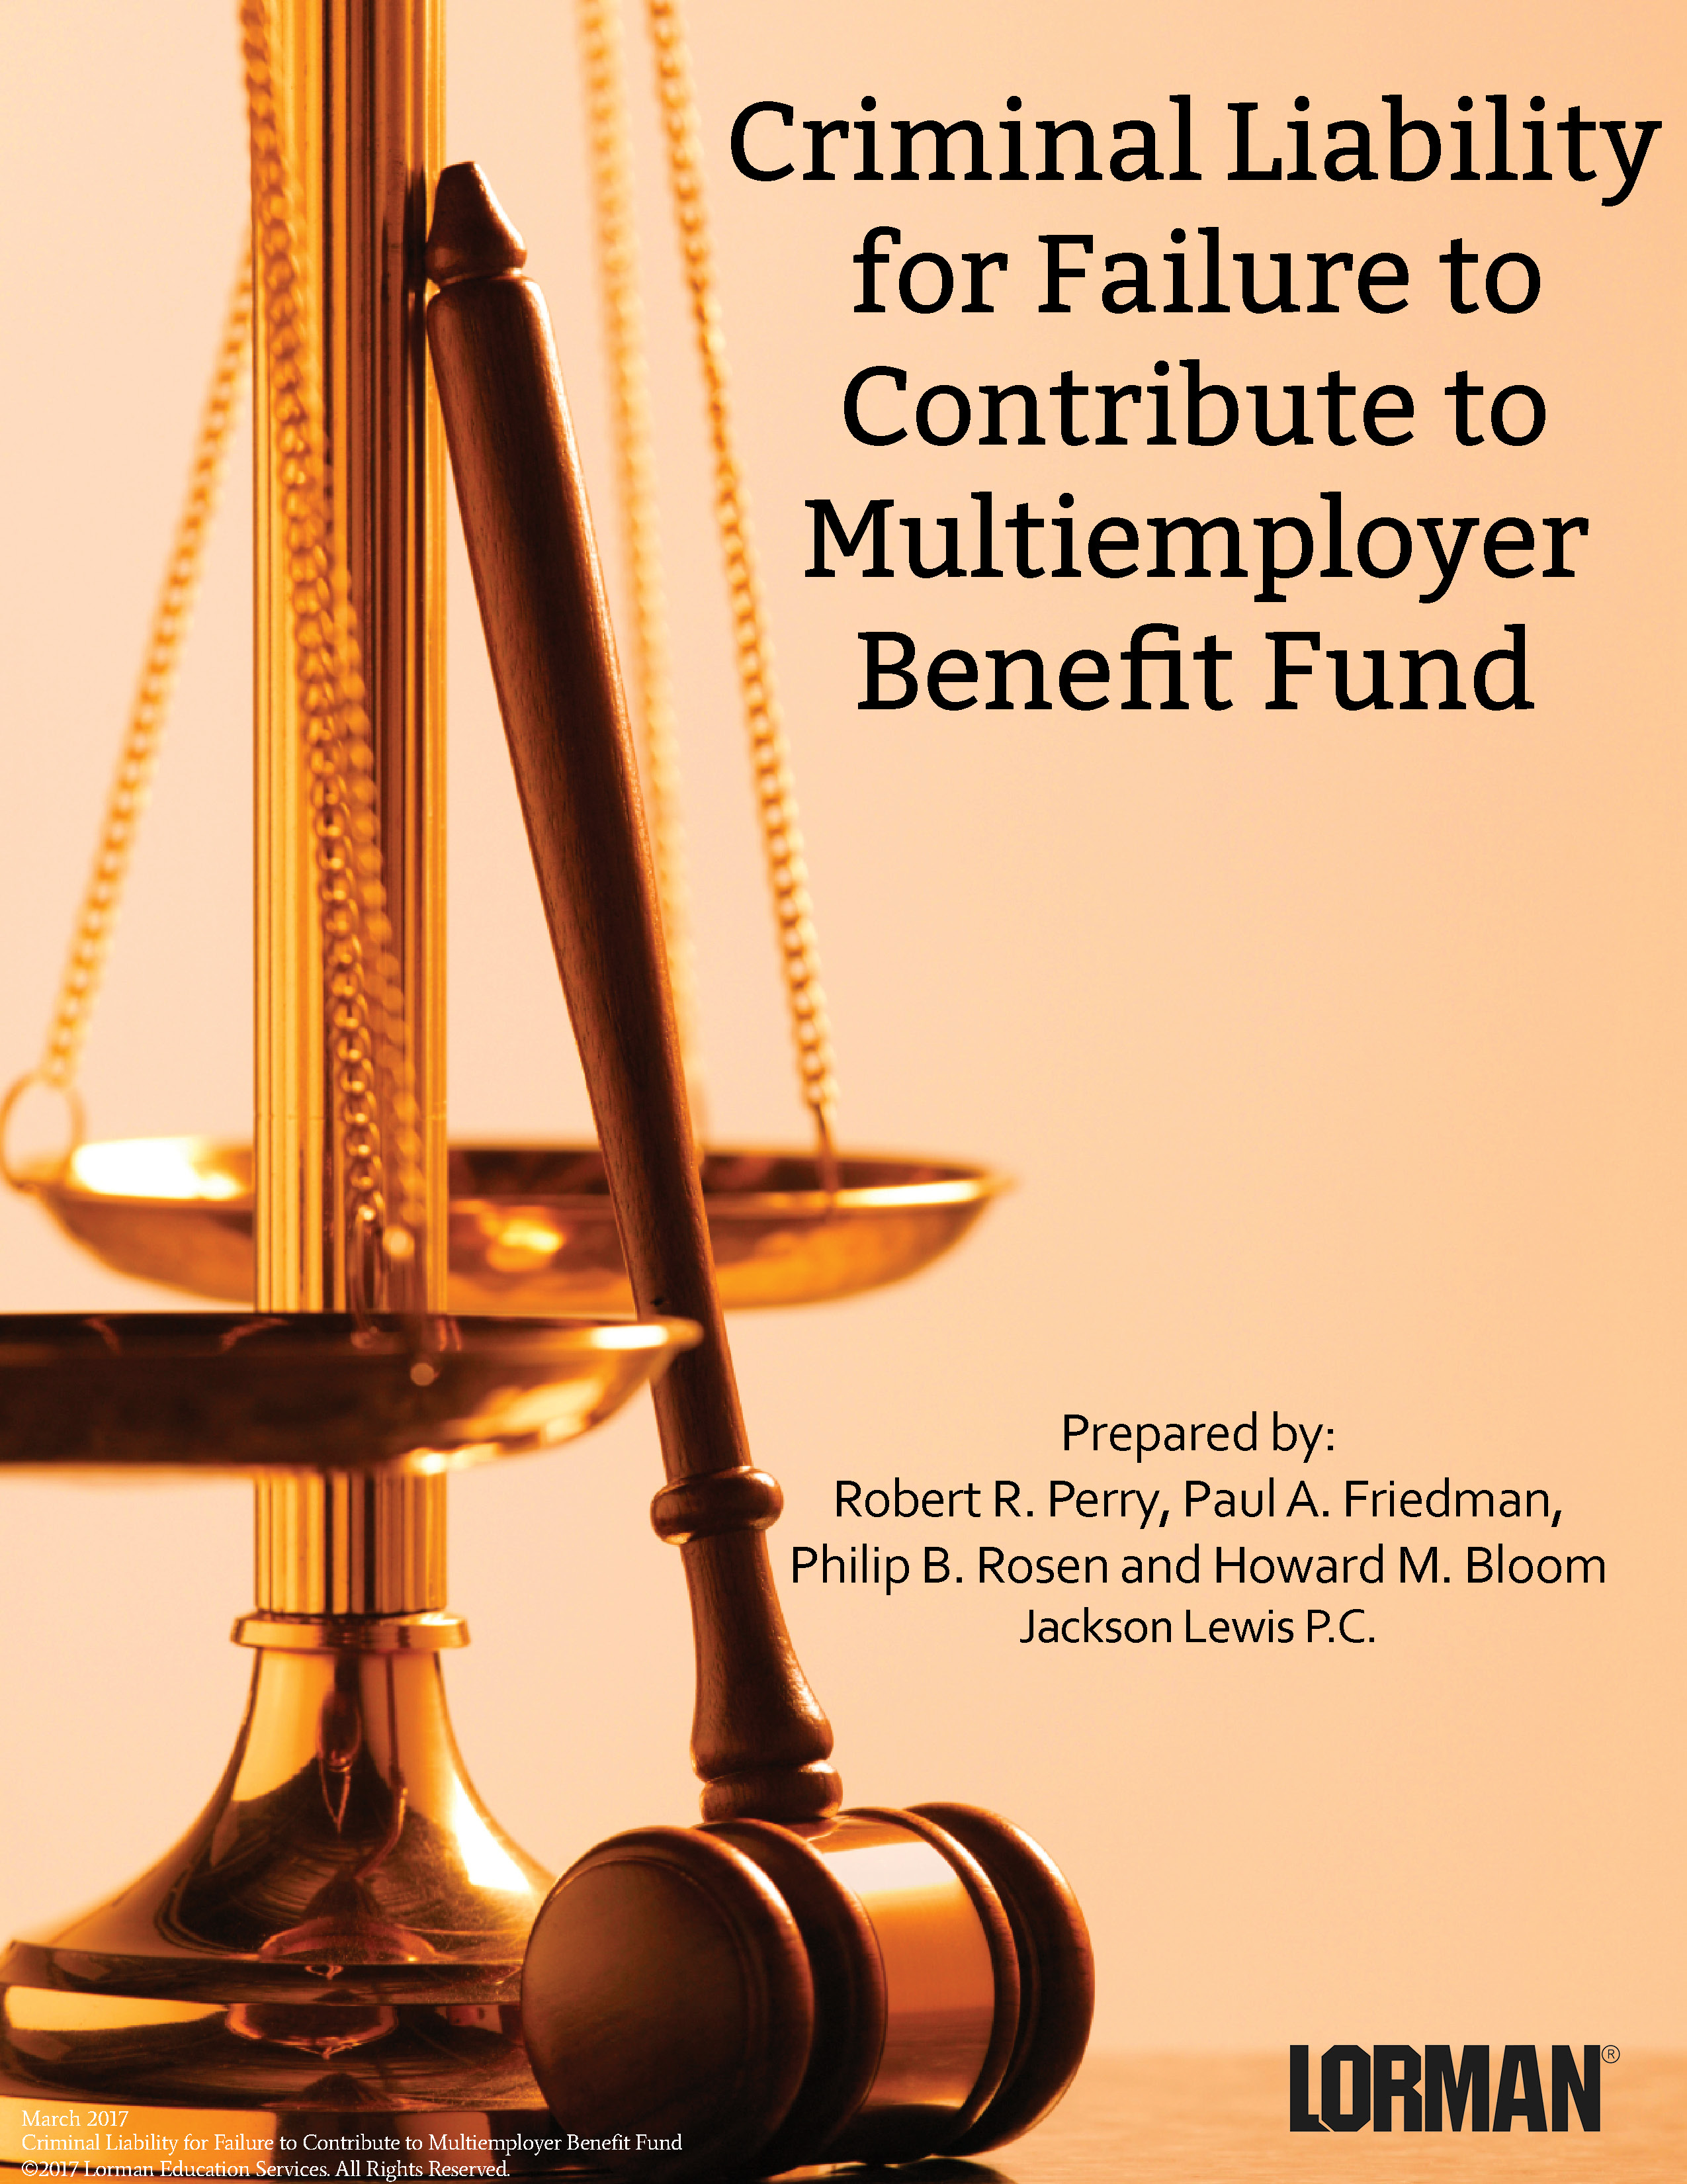 Criminal Liability for Failure to Contribute to Multiemployer Benefit Fund?